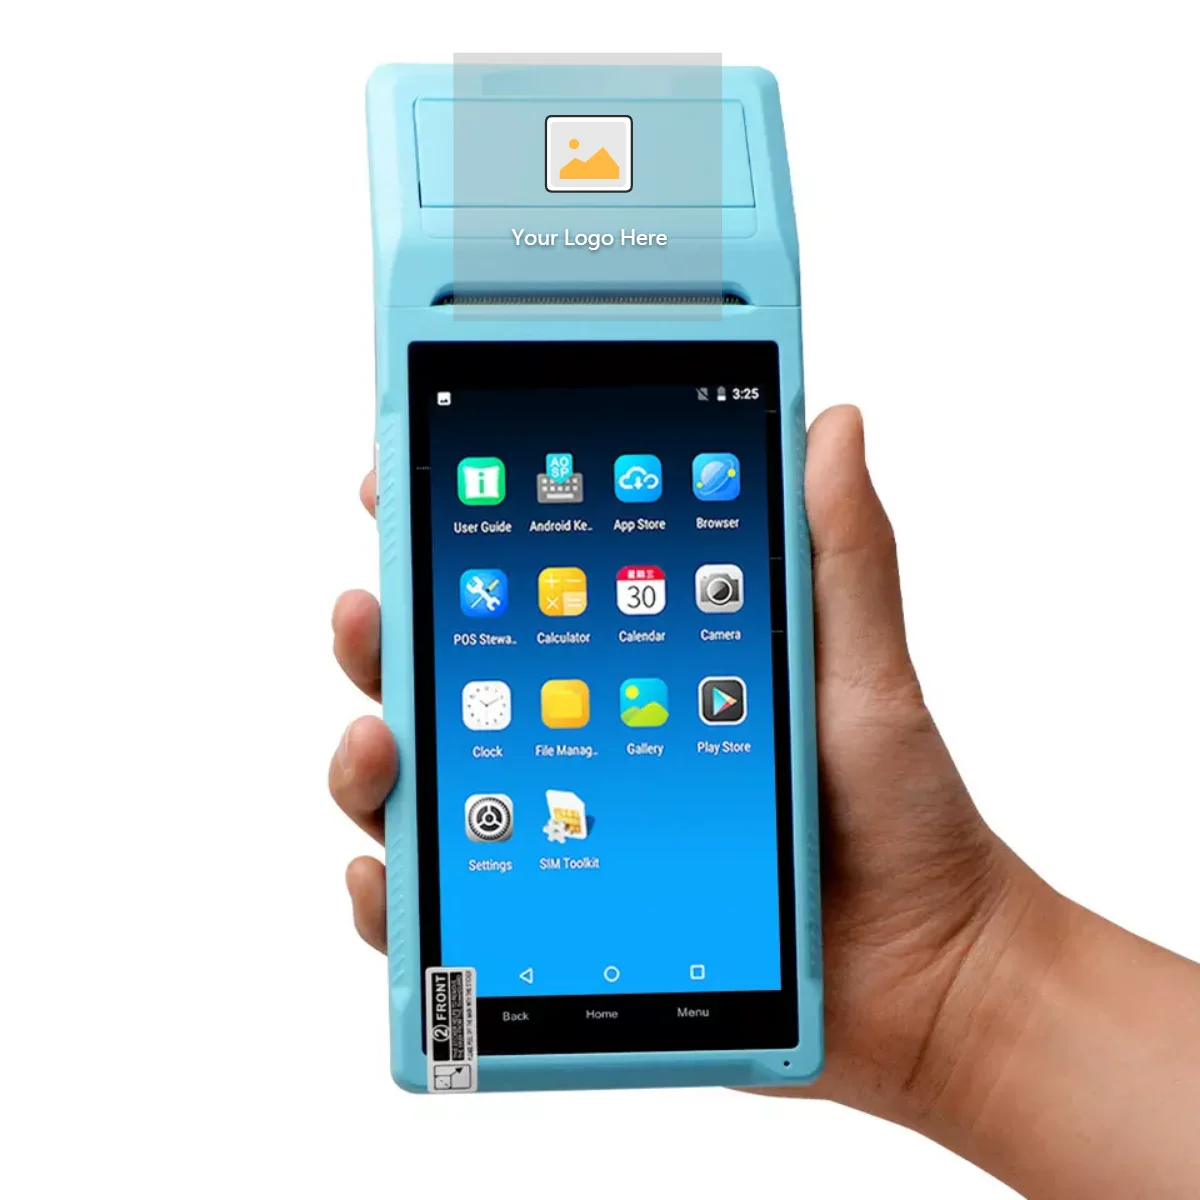 

OWNFOLK 4G handheld pos android PDA built-in 58mm thermal printer scan QR code 2G RAM and 16G SSD storage